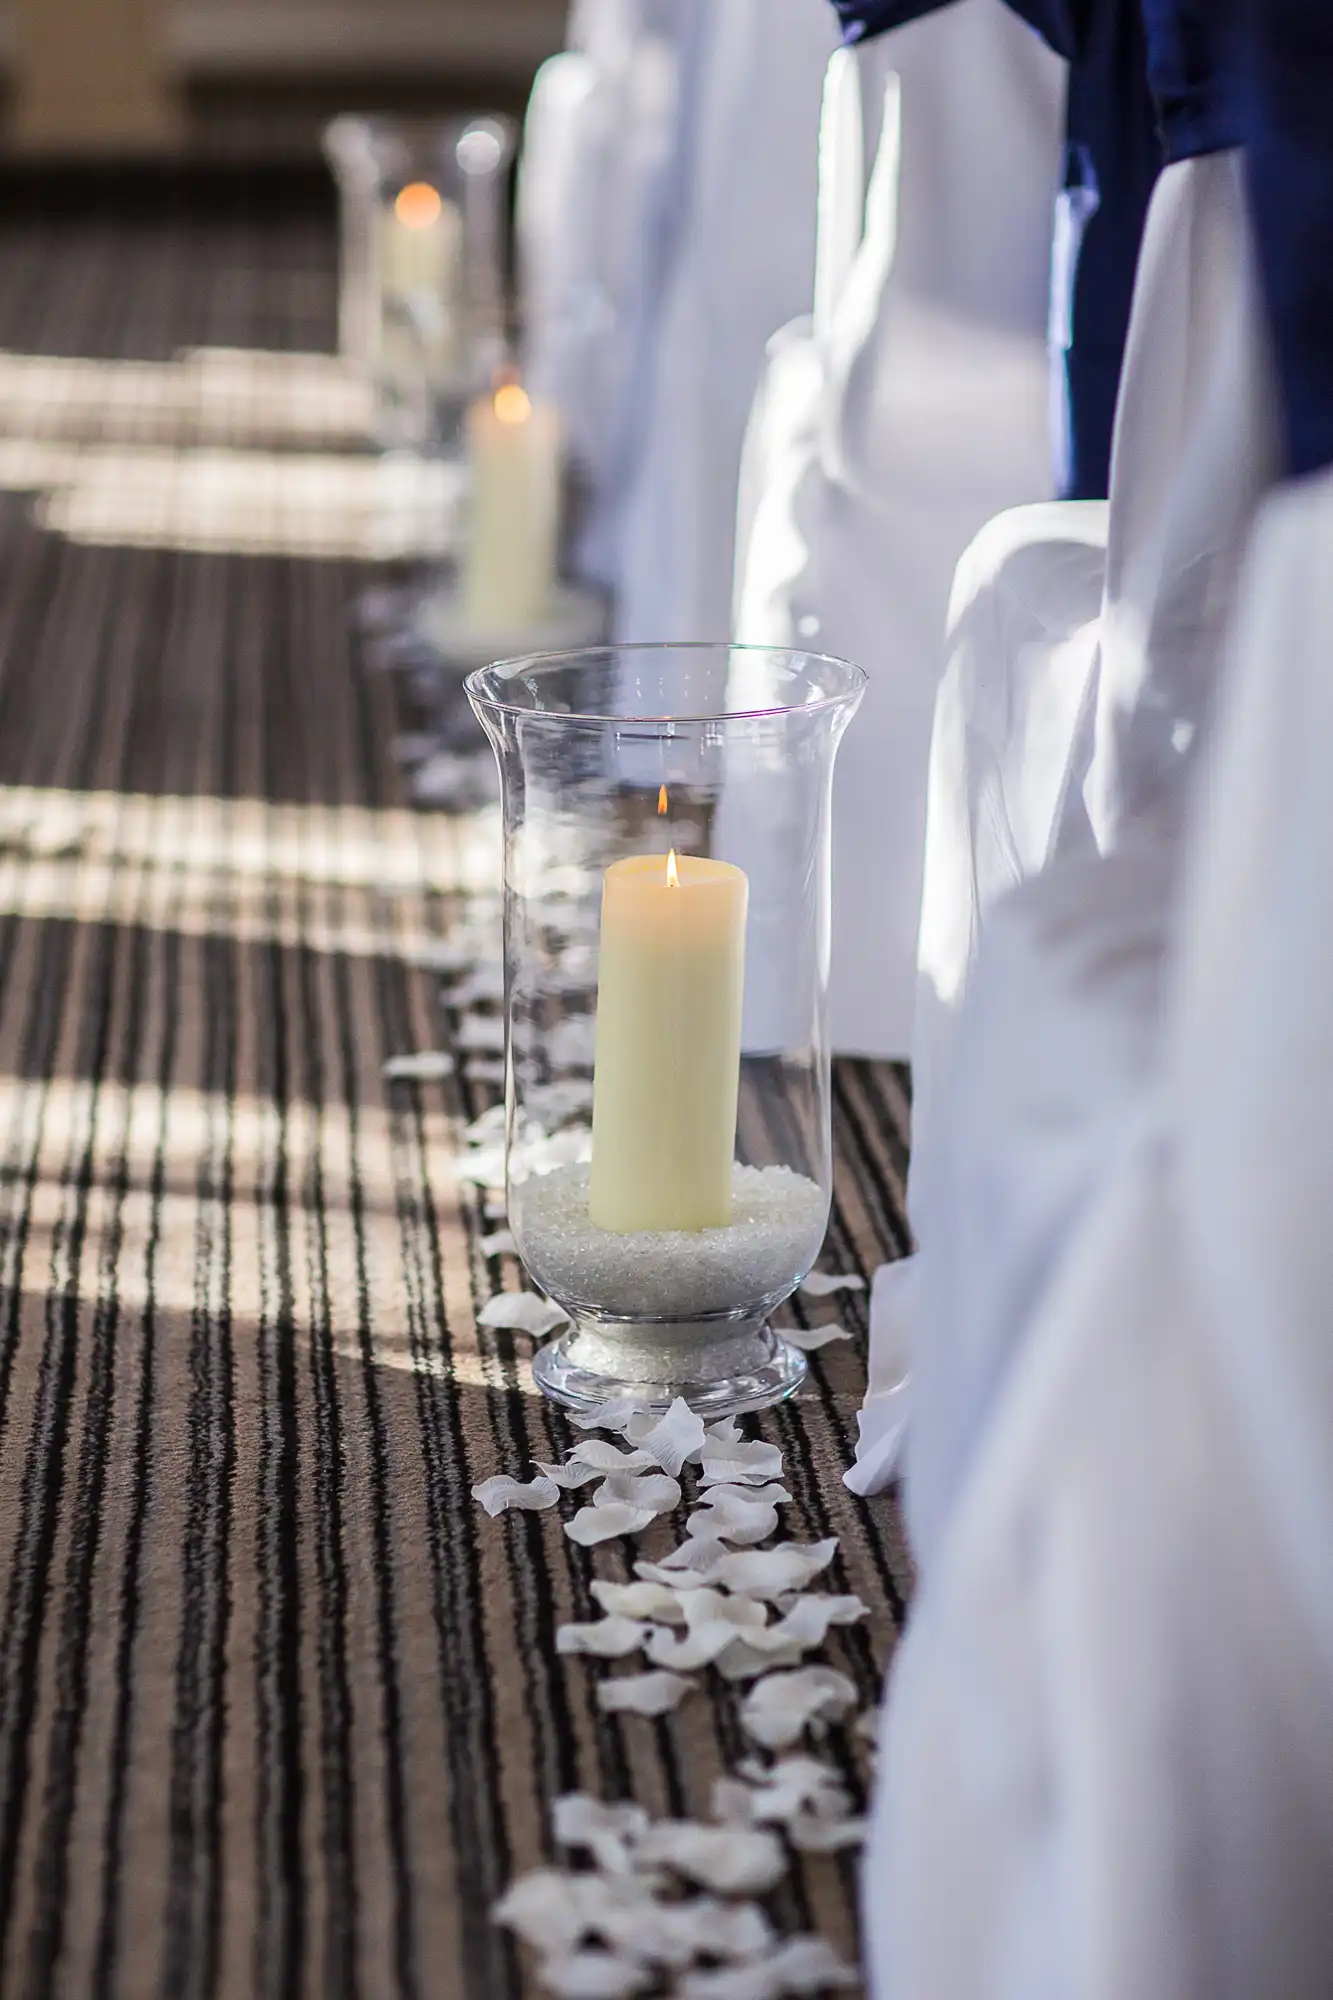 Aisle at a wedding venue decorated with lit candles in glass holders and white petals, alongside chairs with blue sashes.